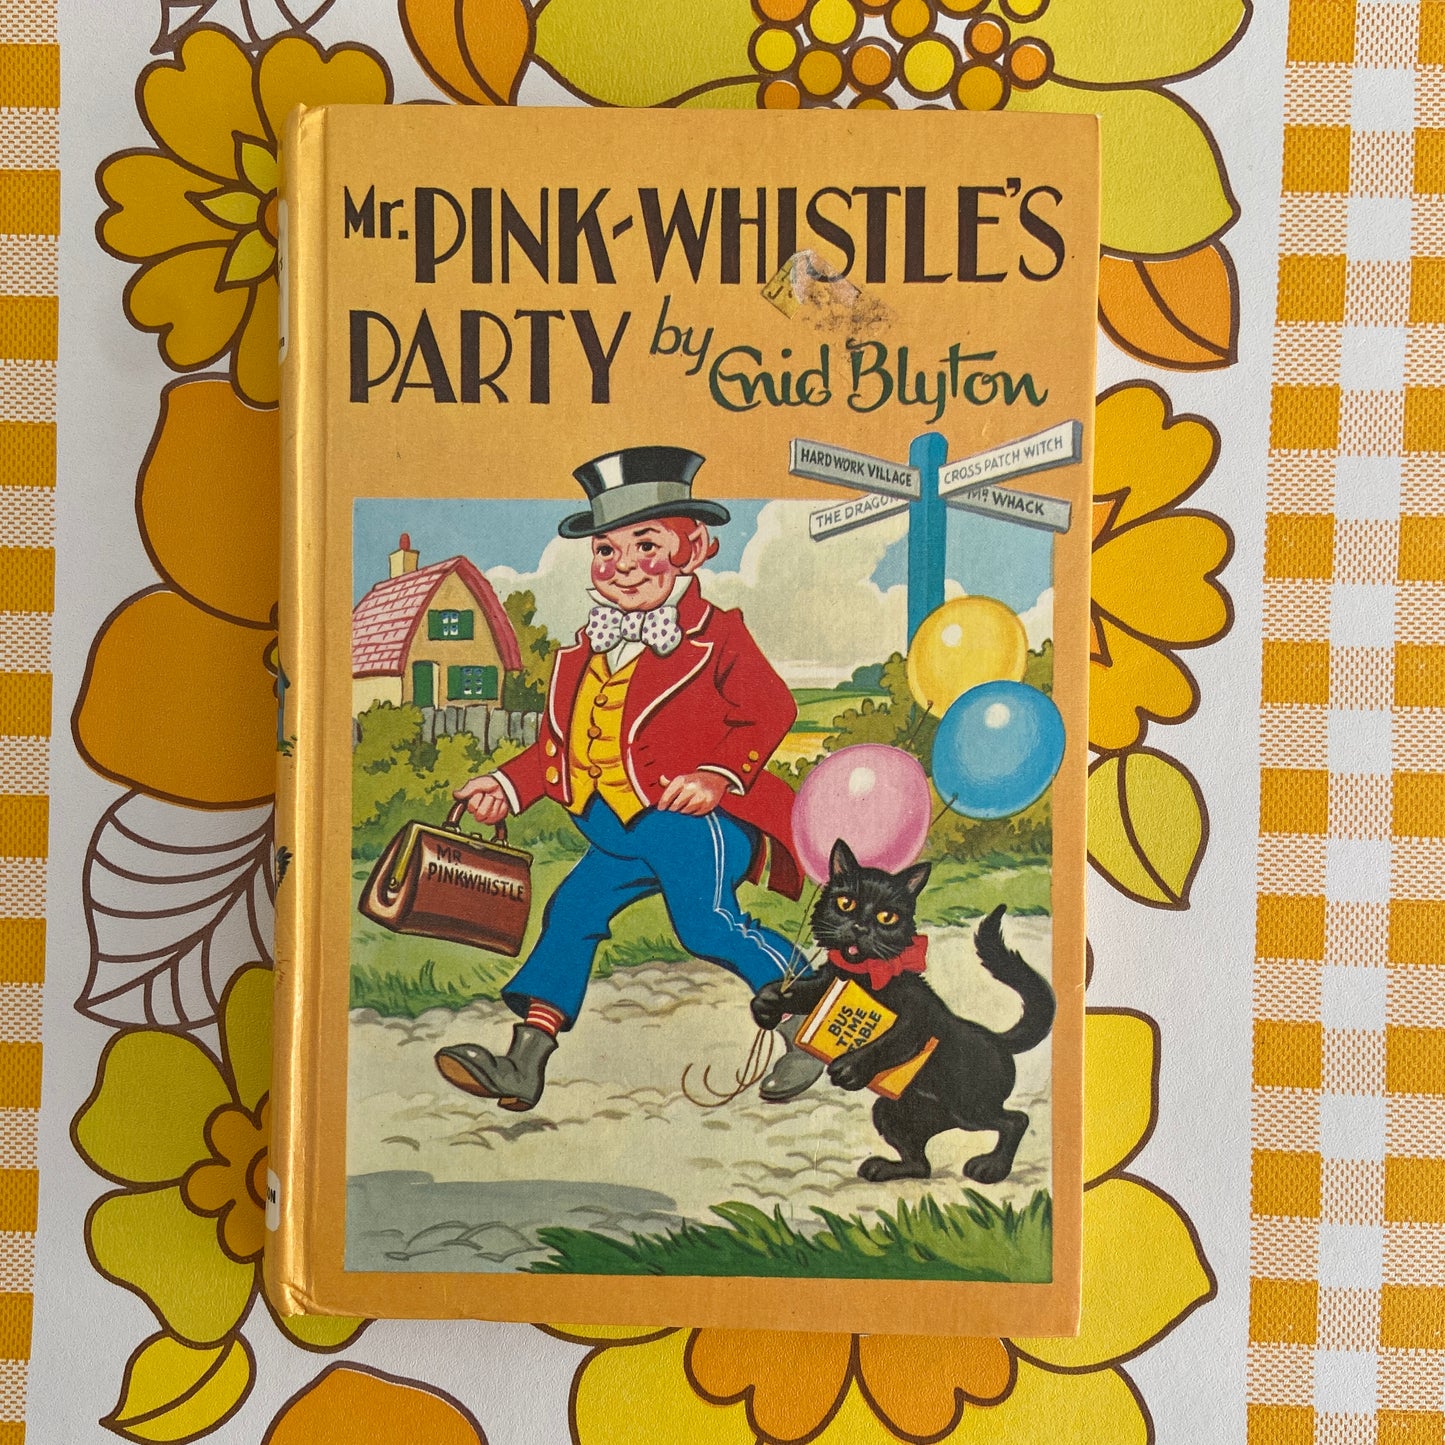 ENID BLYTON Vintage Mr Pink Whistle's Party Hard Cover